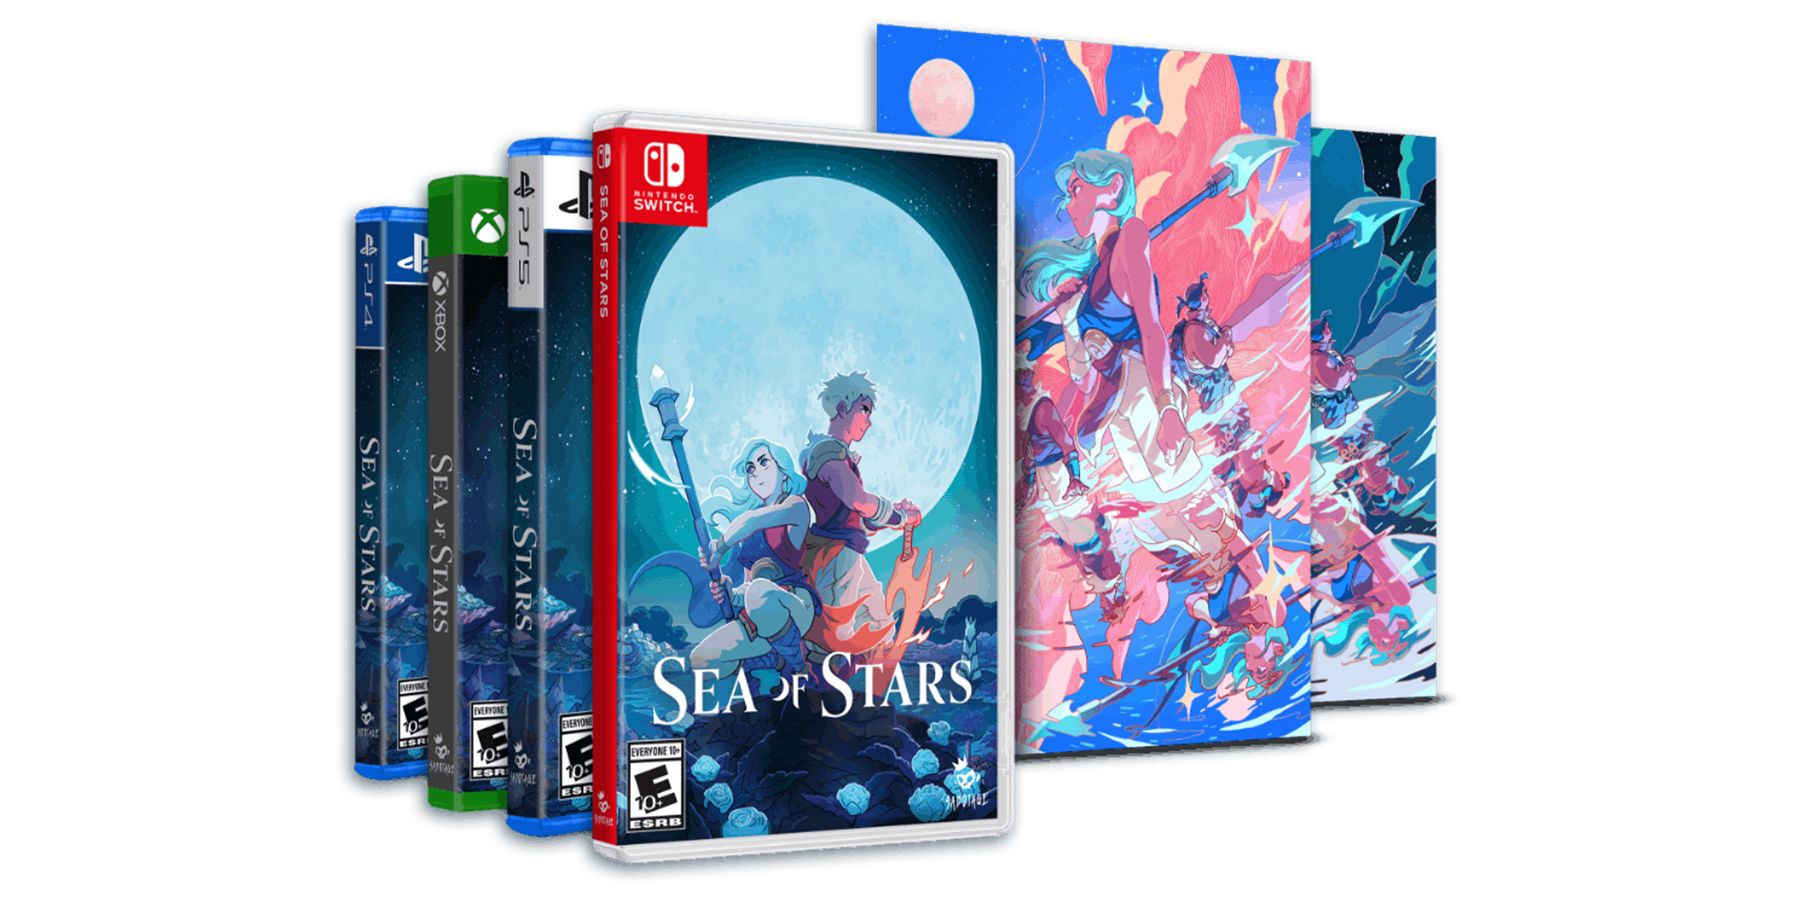 Sea of Stars all physical editions and double-sided poster bonus on white background